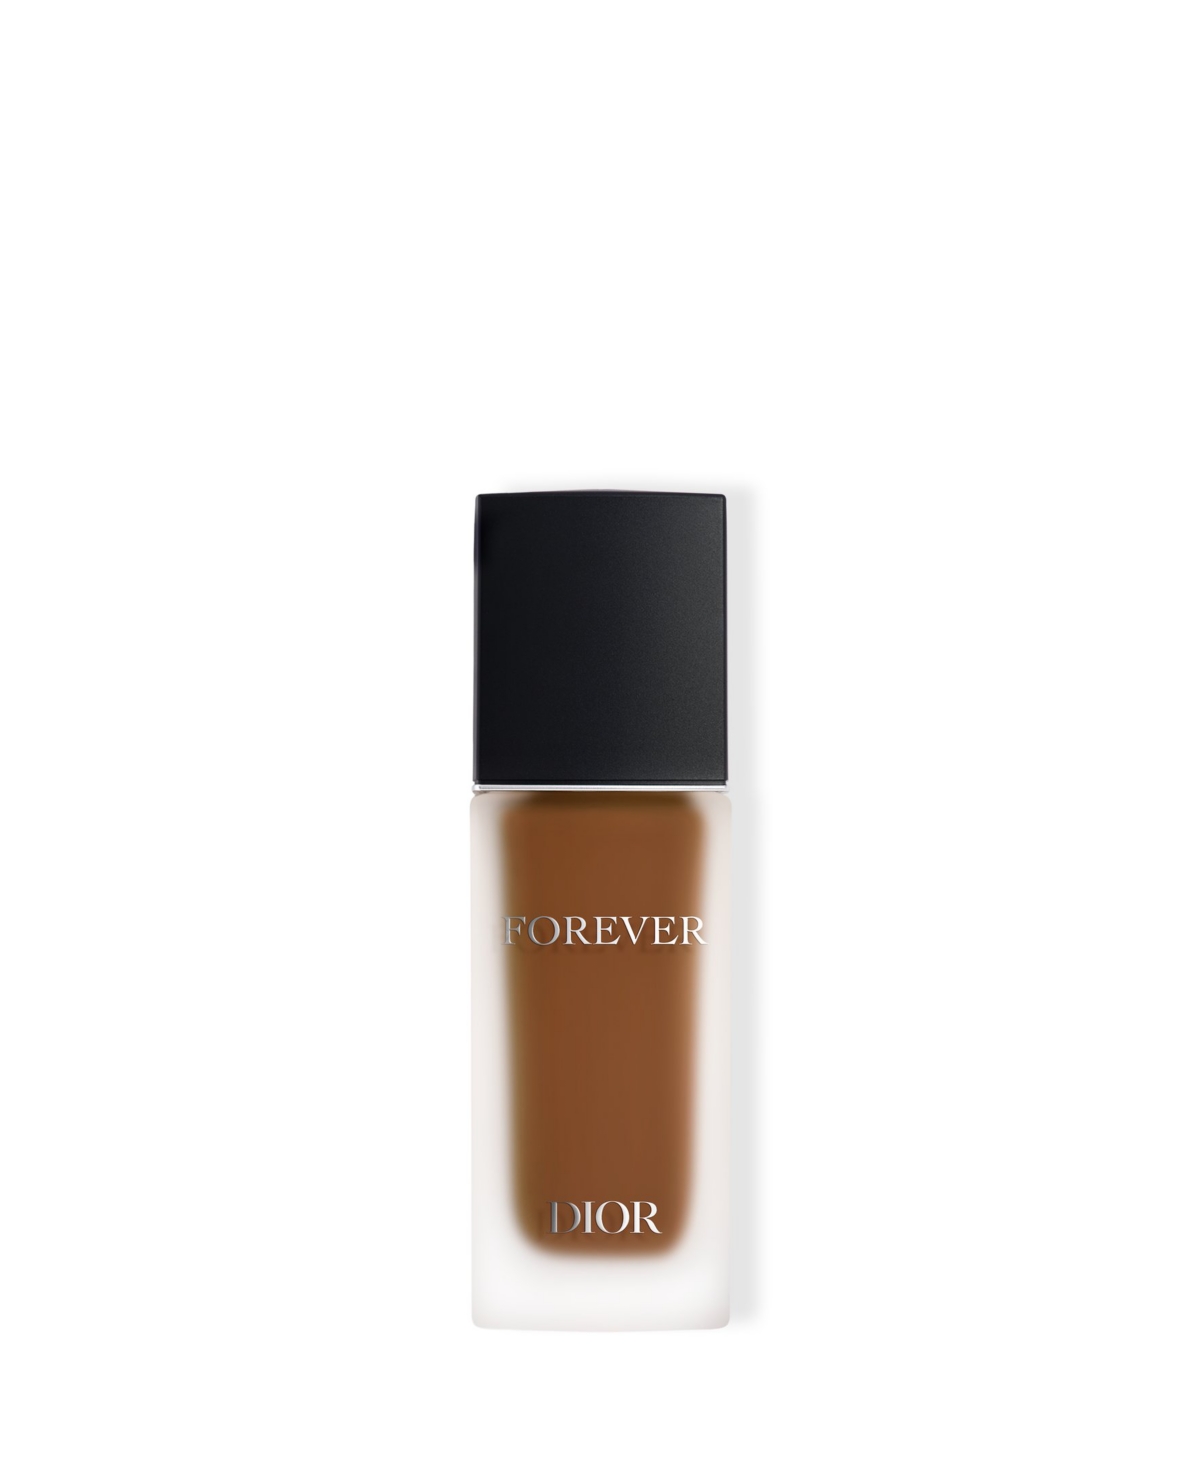 Dior Forever Matte Skincare Foundation Spf 15 In . Neutral (deep Skin With Neutral Undert